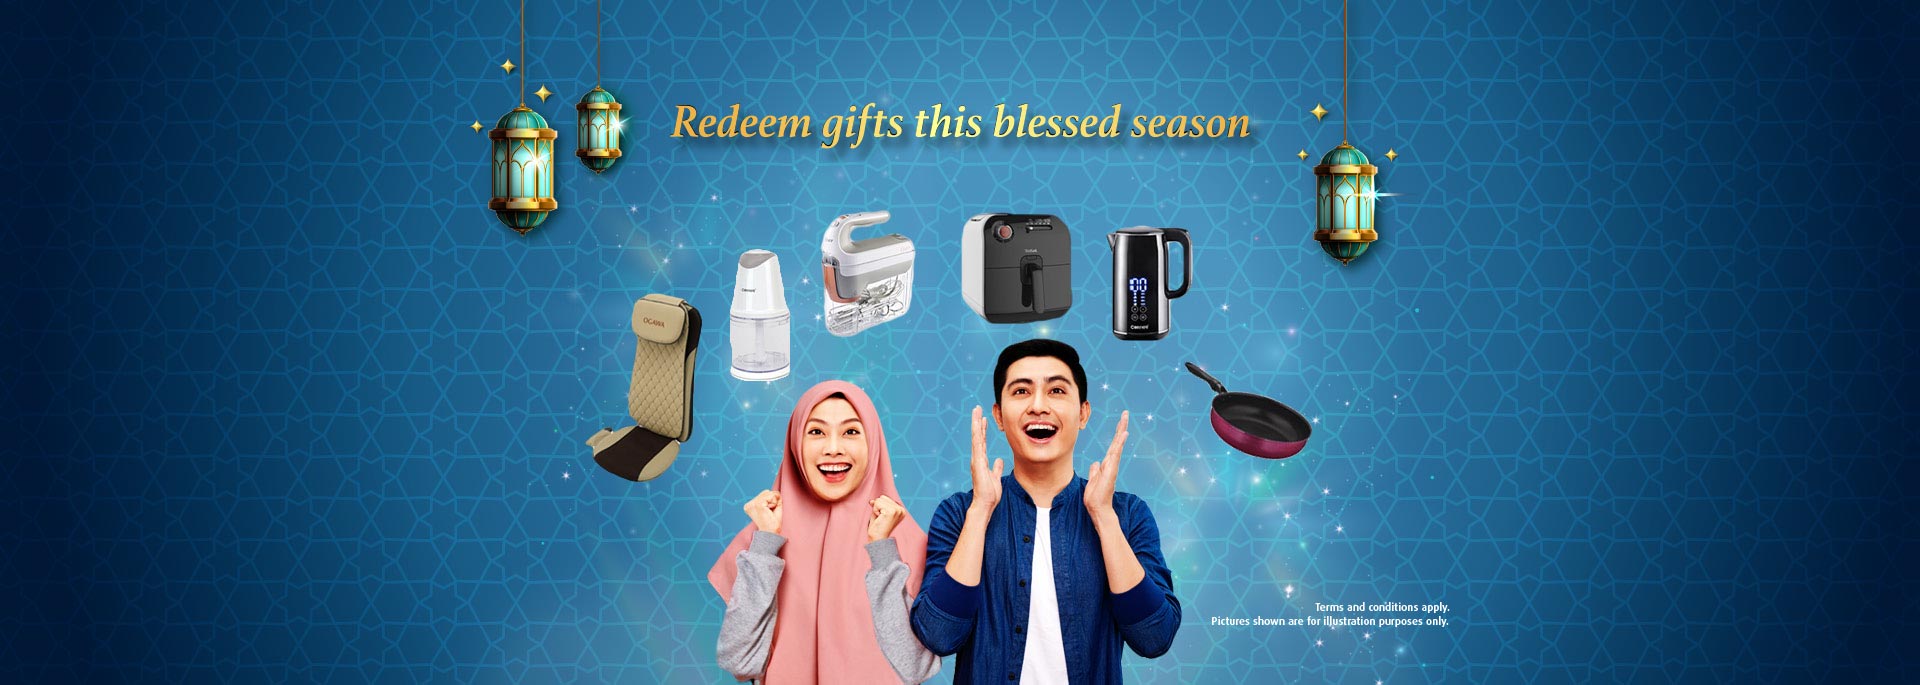 Redeem gifts for every occasion